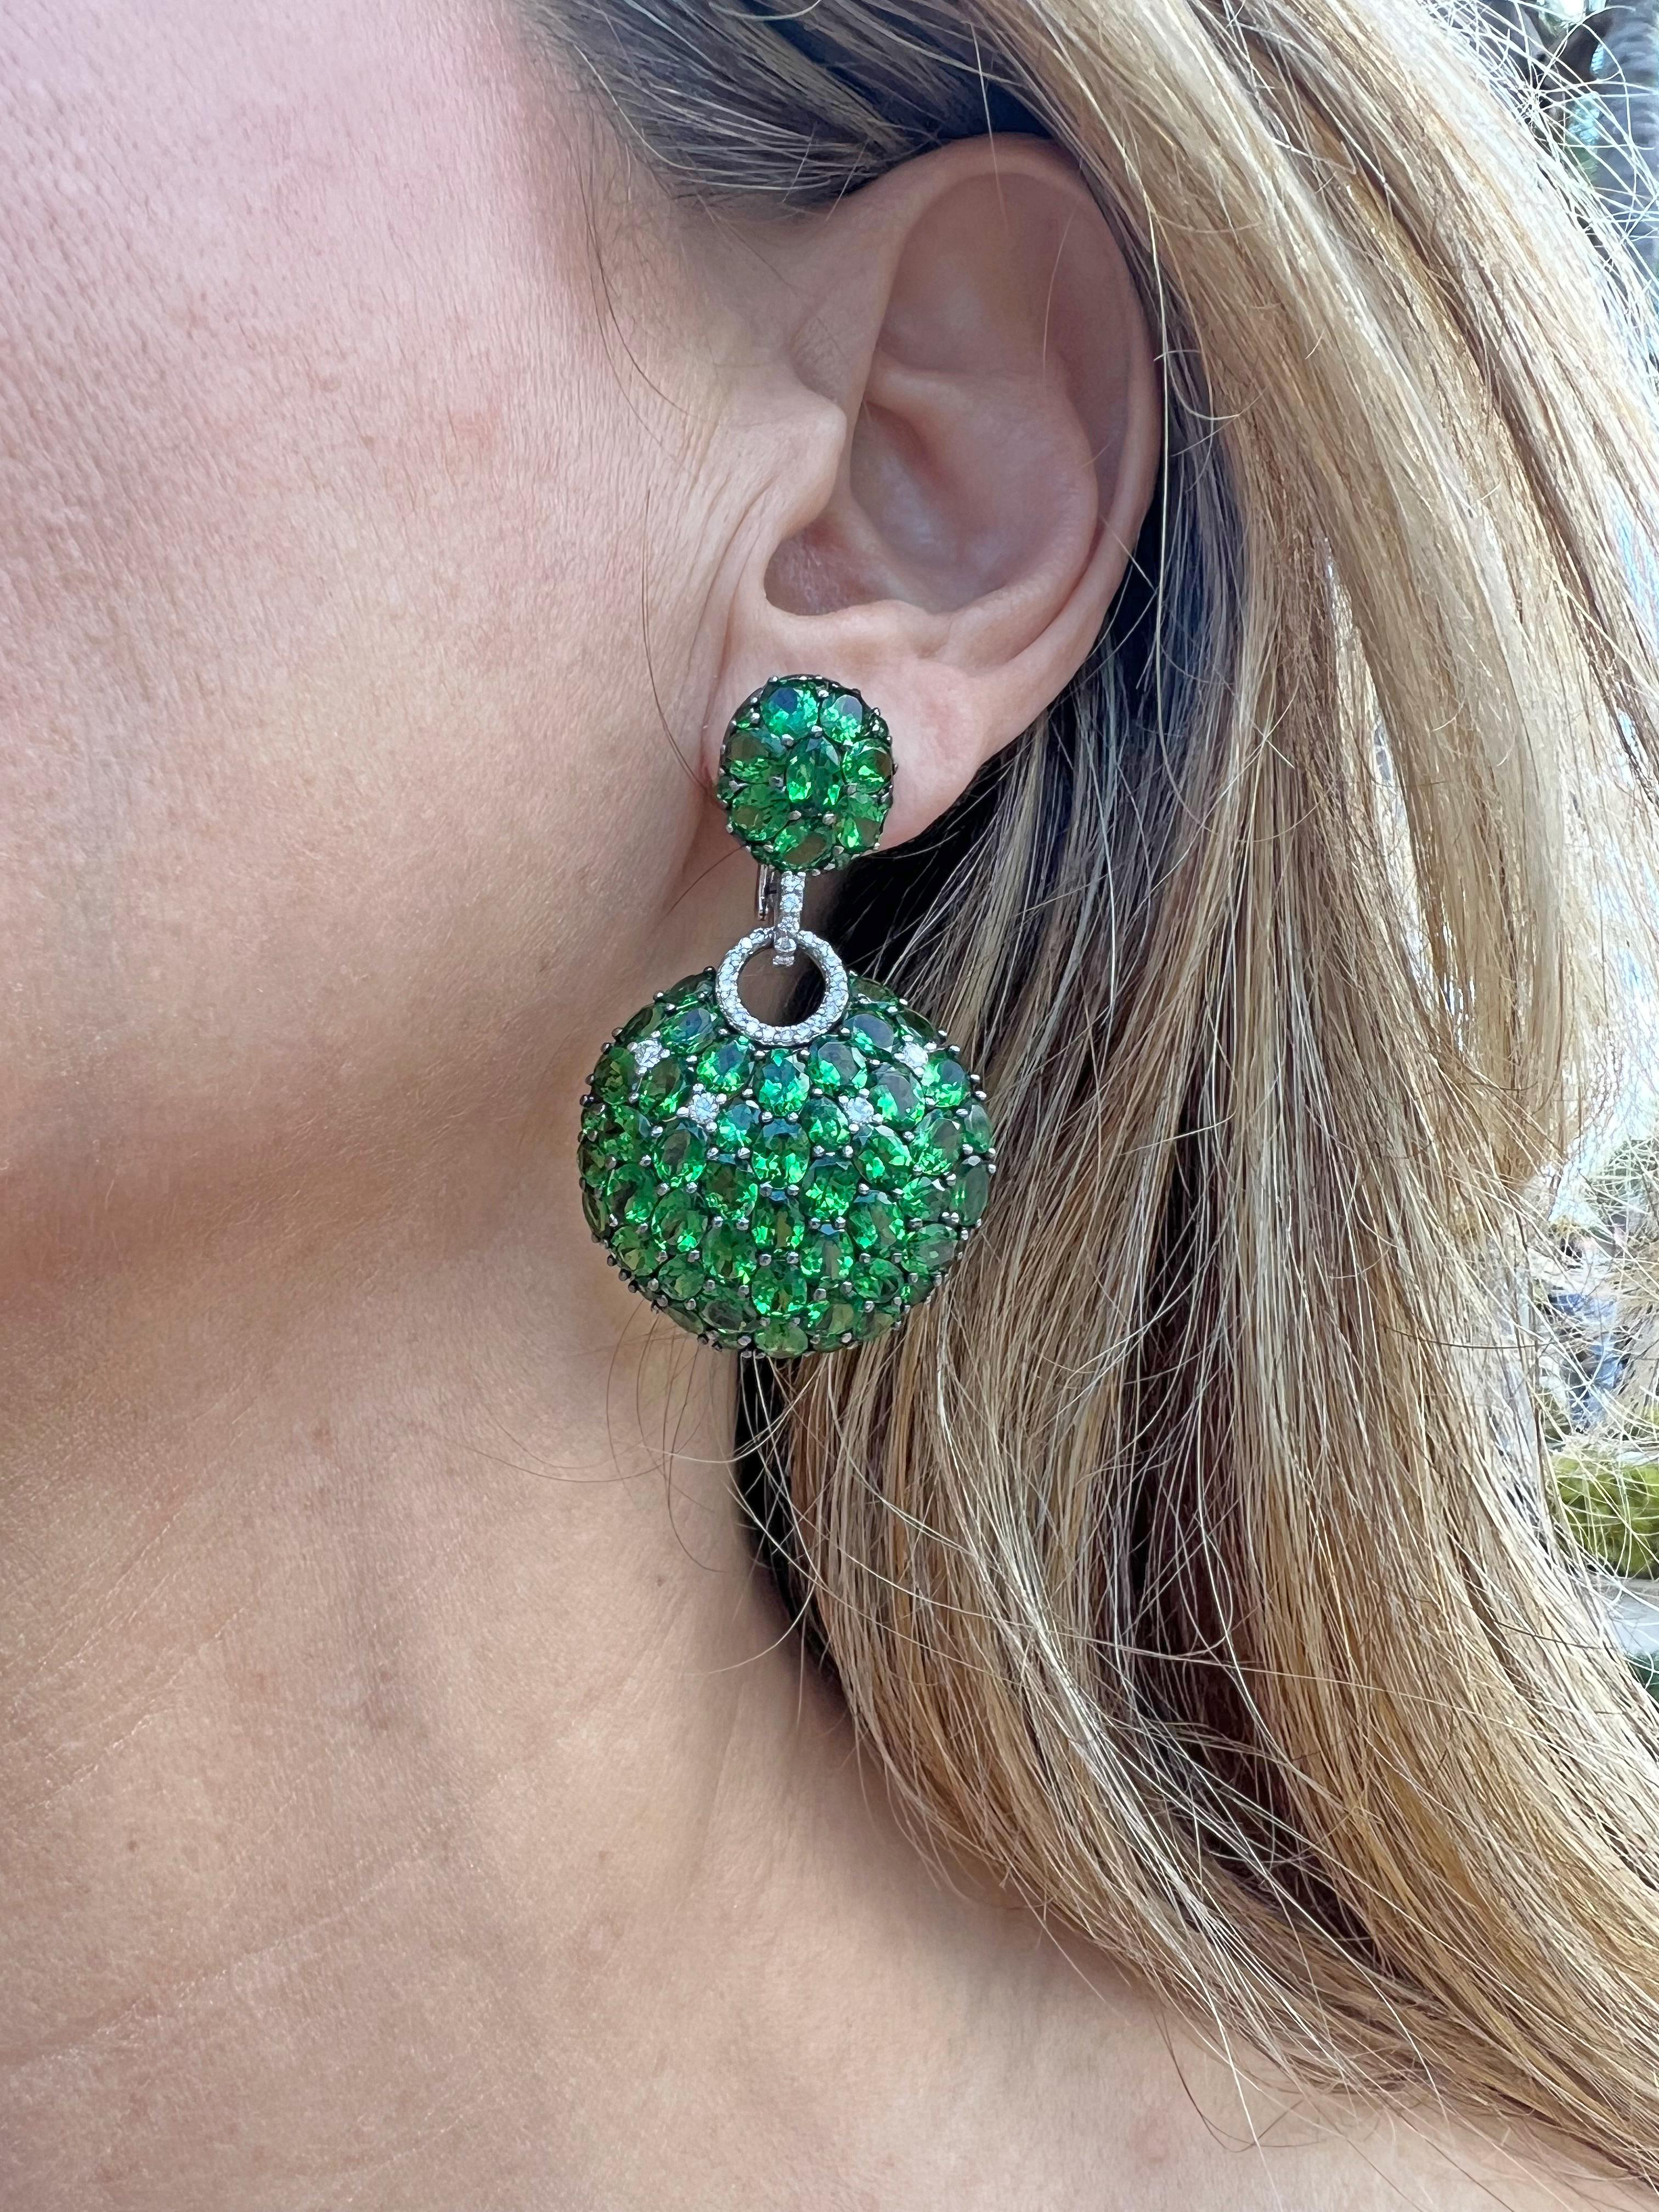 Tsavorite garnet and diamond pendant earrings in polished 18k white gold.  Larger circular-shaped domed drops suspended from smaller oval-shaped domed tops, both pave-set with tsavorite garnets and diamonds throughout.  Joined in the center by a